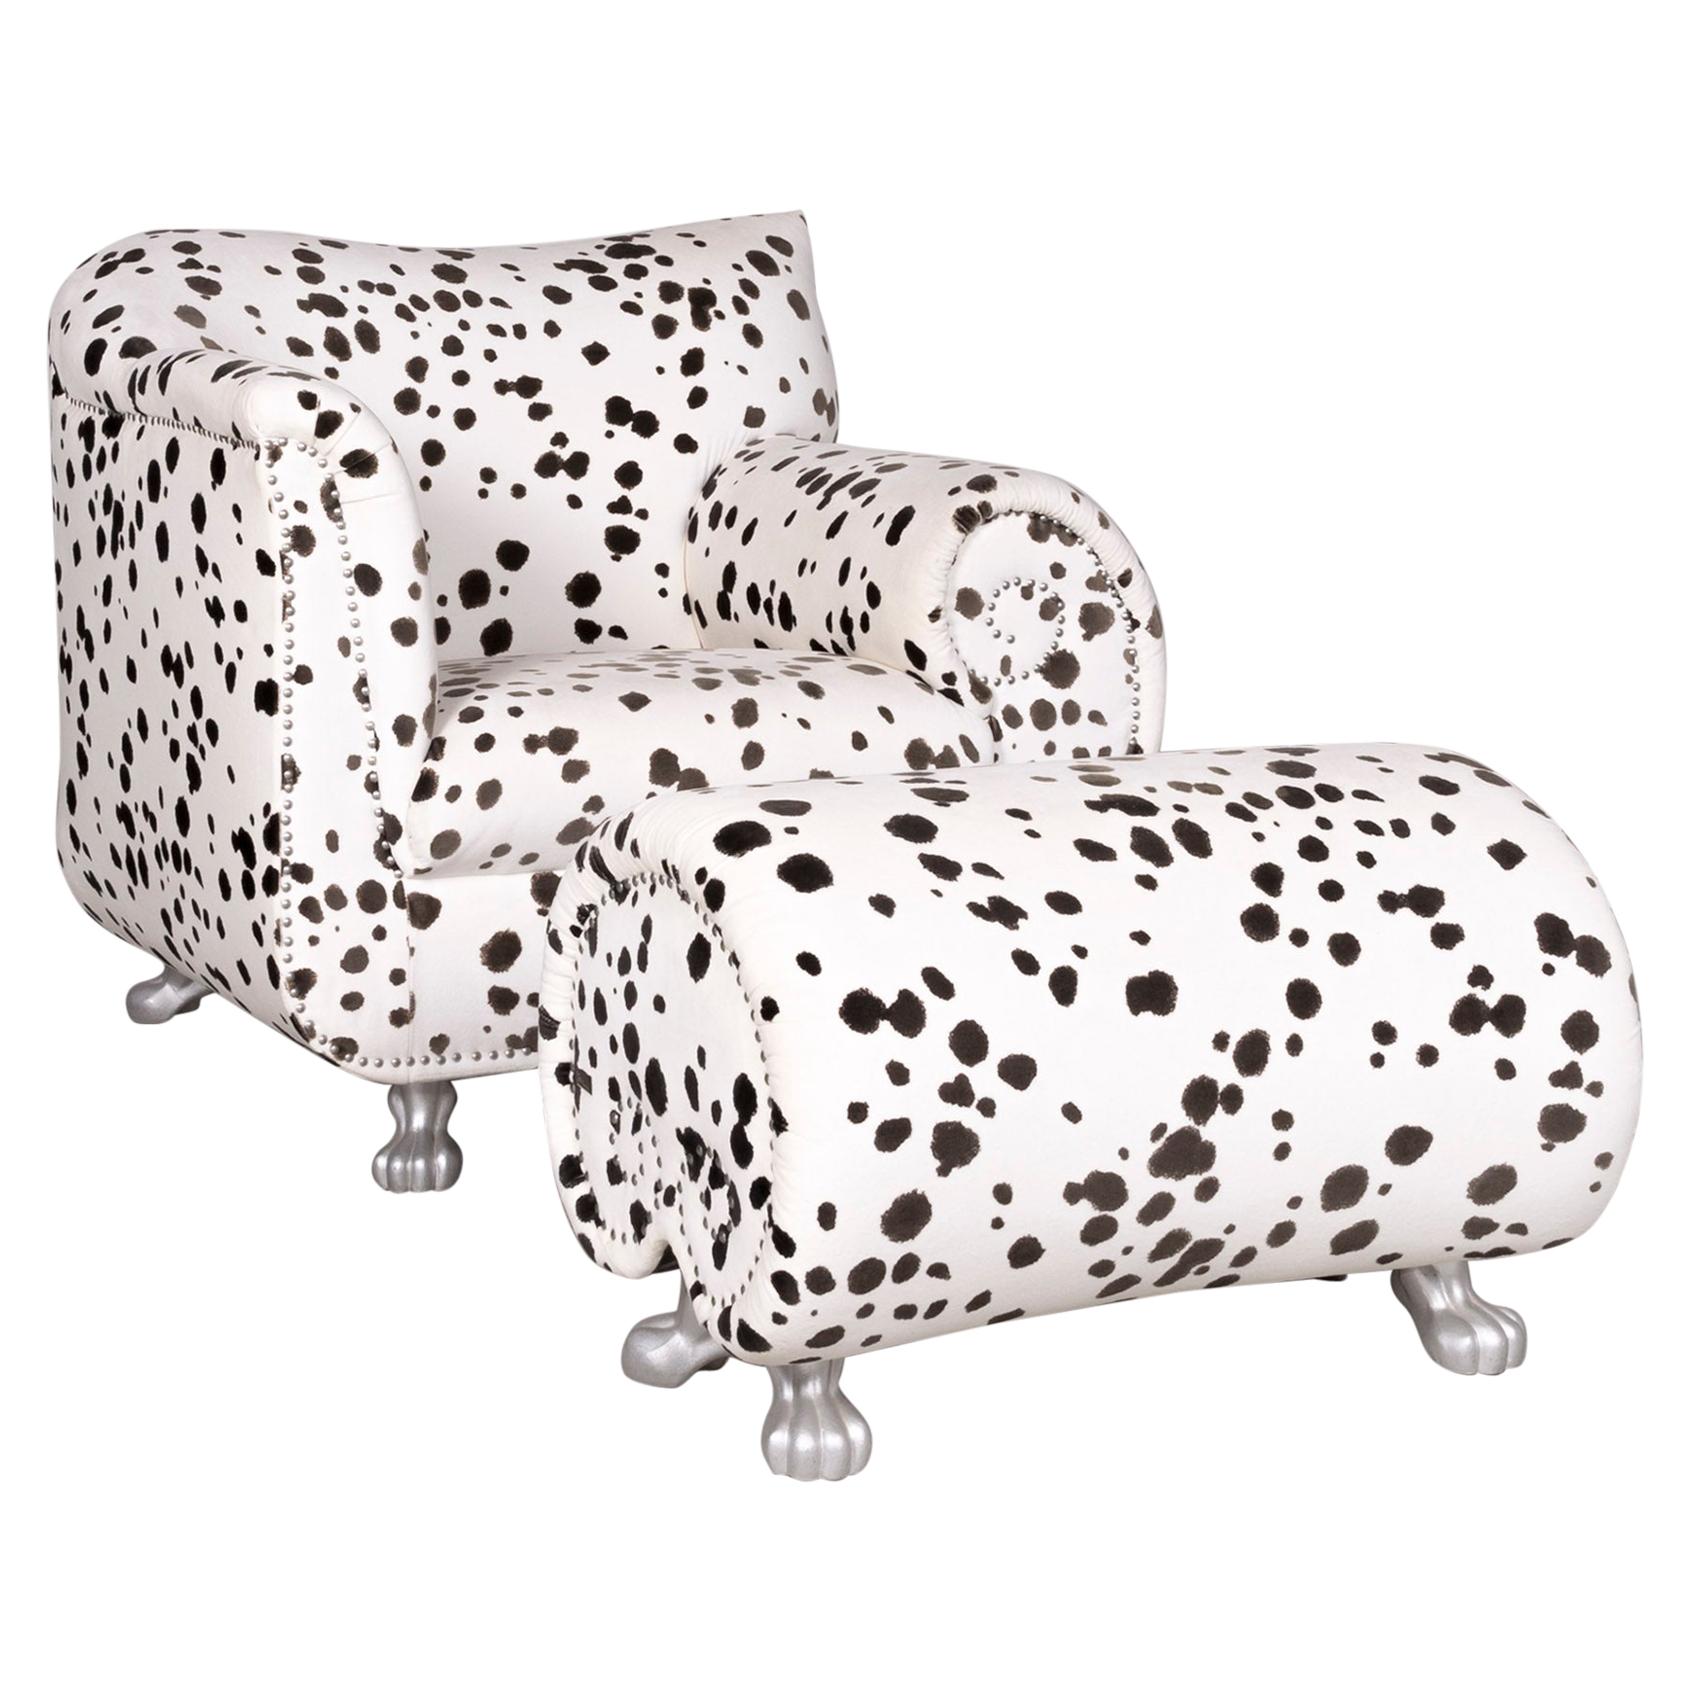 Bretz Gaudi Designer Fabric Armchair White Dalmatian Pattern Chair with Stool For Sale